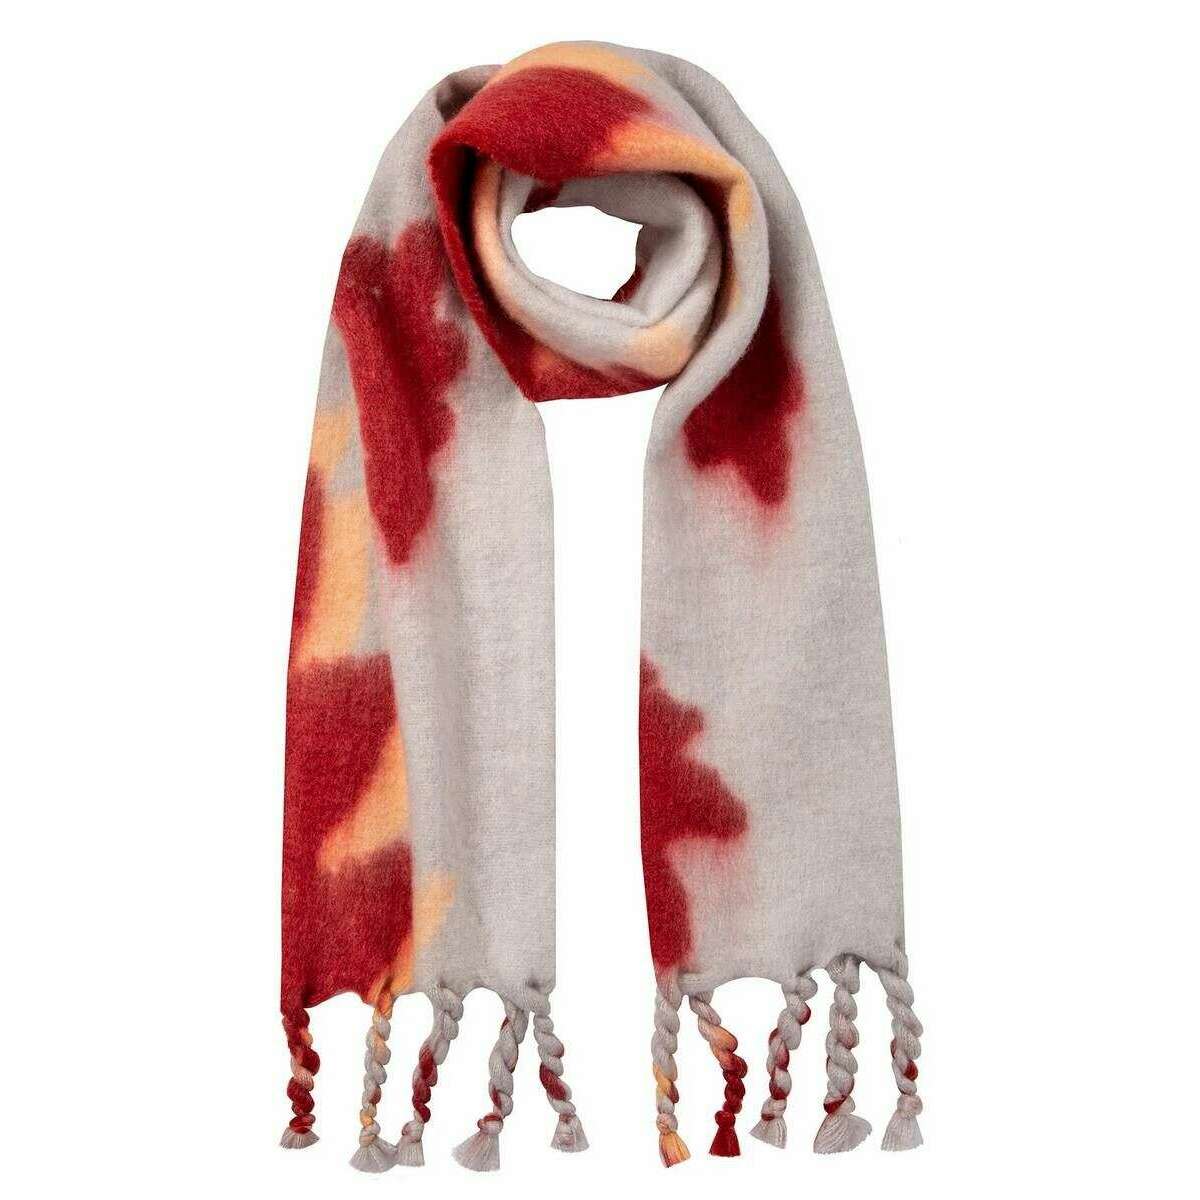 Dents Abstract Leaf Pattern Blanket Scarf - Mist Grey/Berry Red